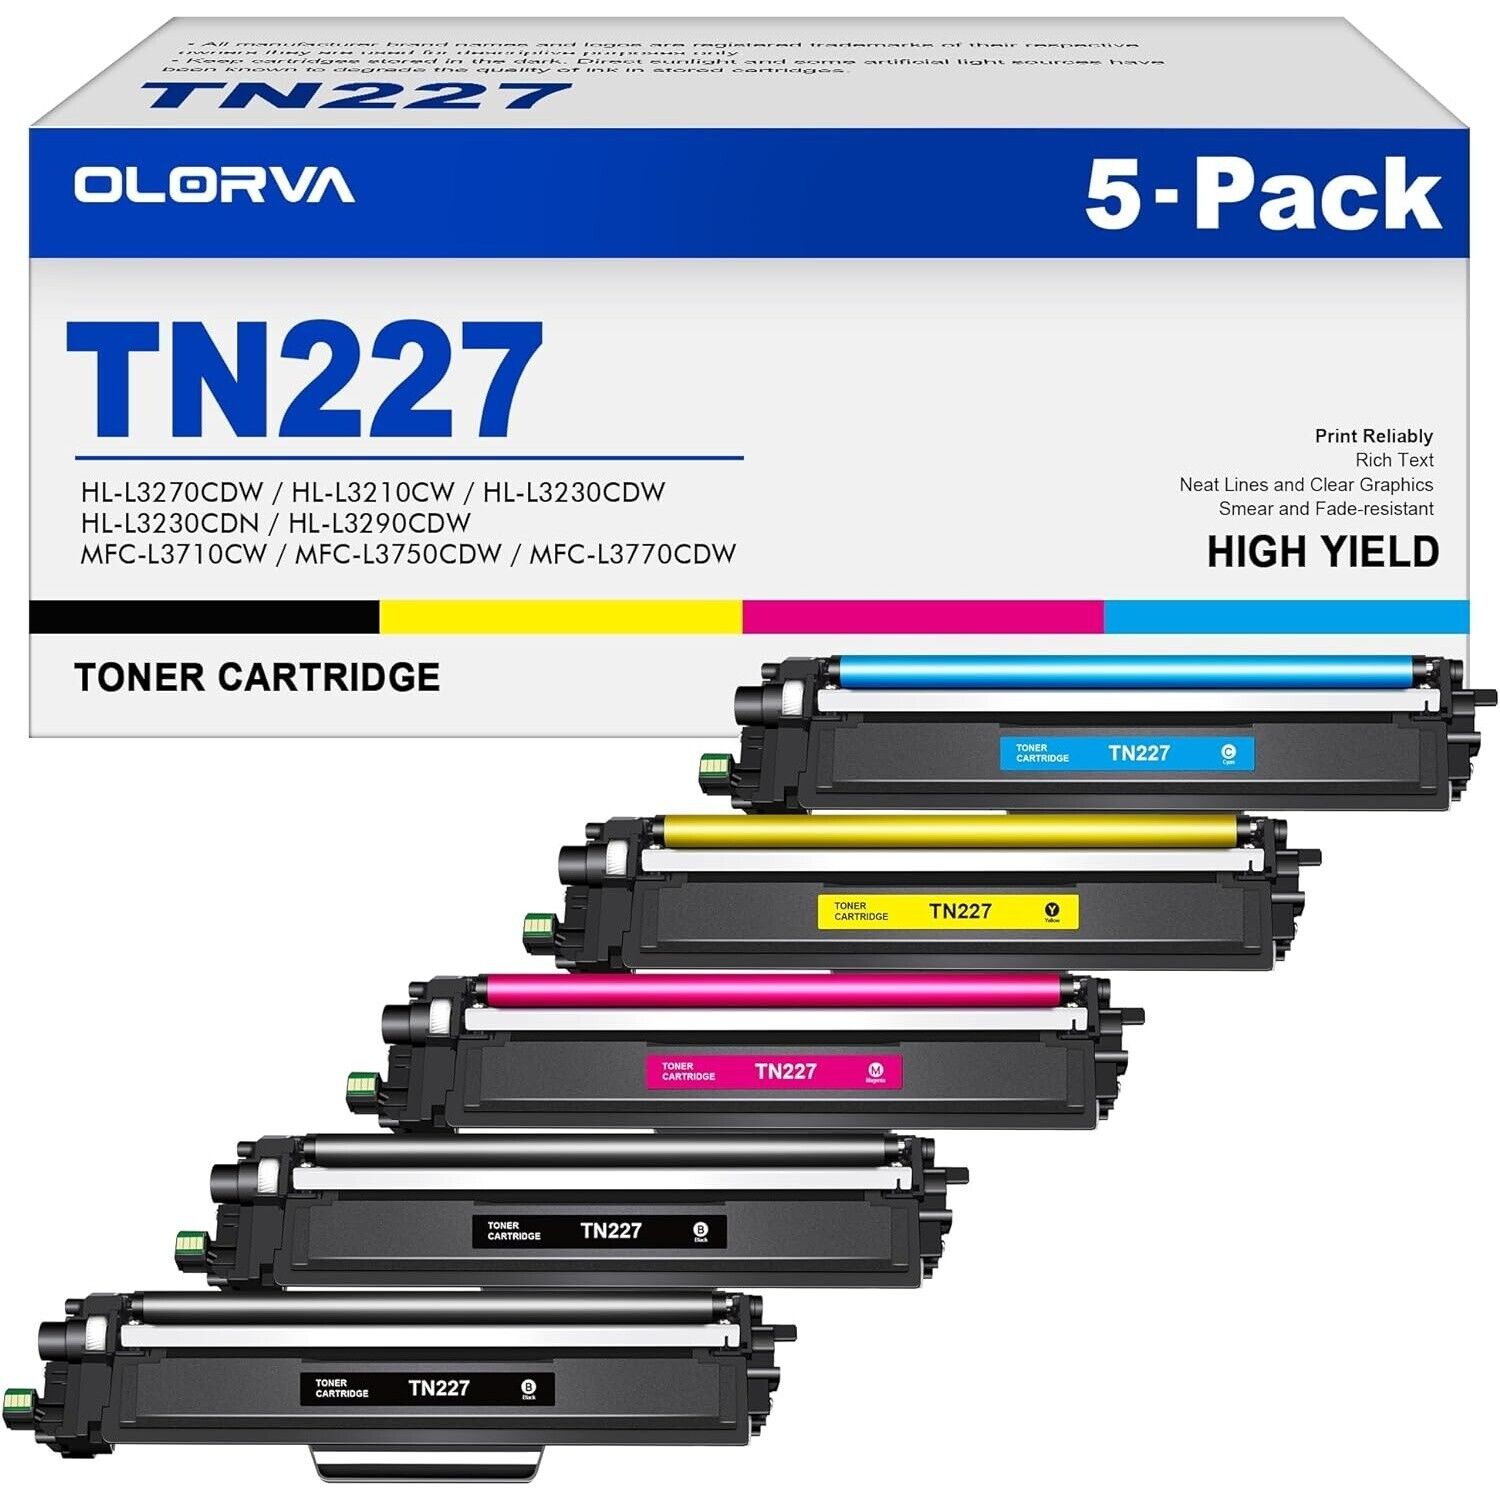 5 Pack TN227 High Yield Toner Cartridge Compatible for TN-227 Brother TN-223 bk